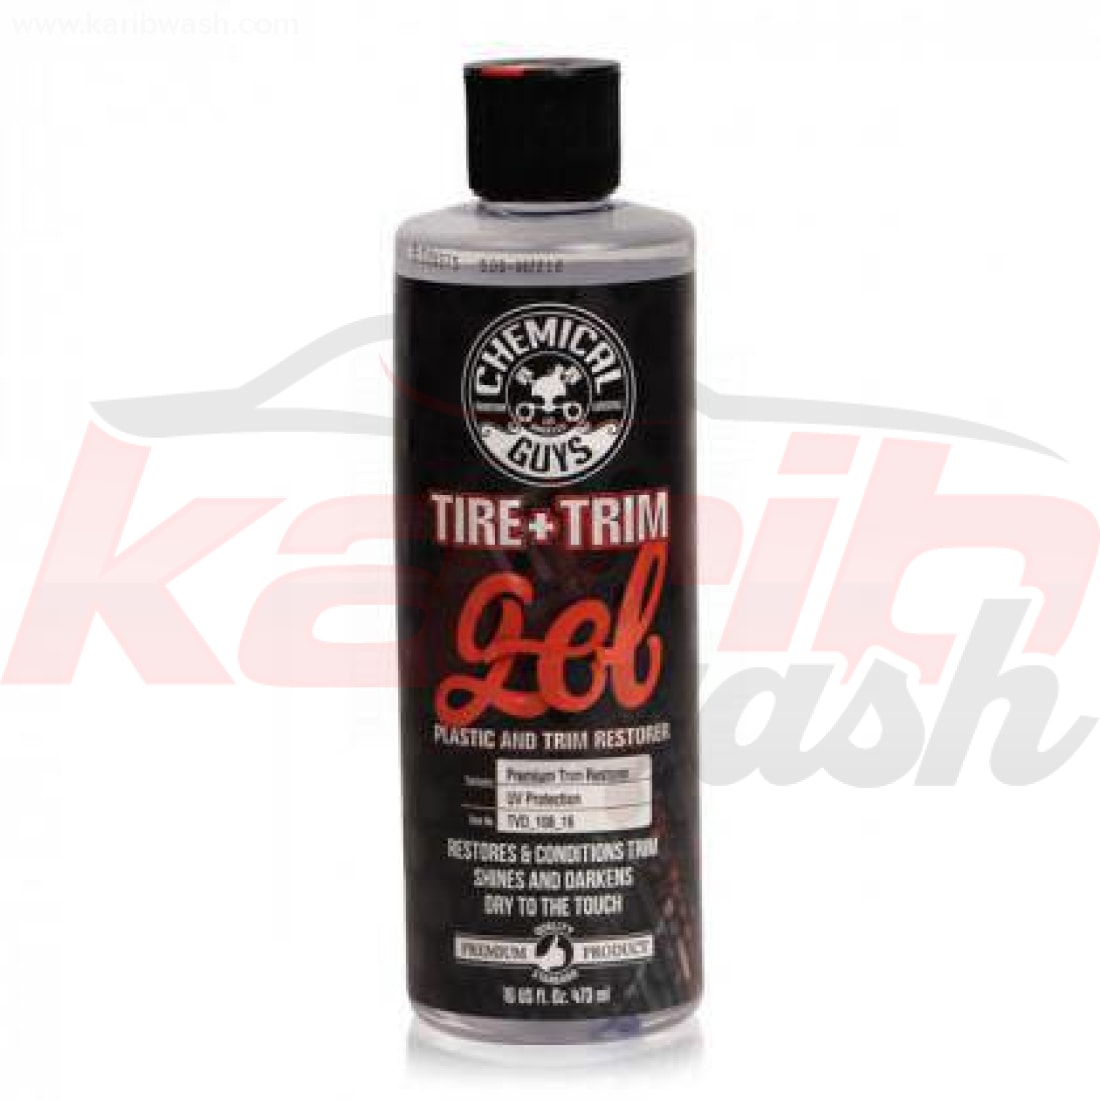 Tire and Trim Gel For Plastic & Rubber(16 oz) - CHEMICAL GUYS - KARIBWASH